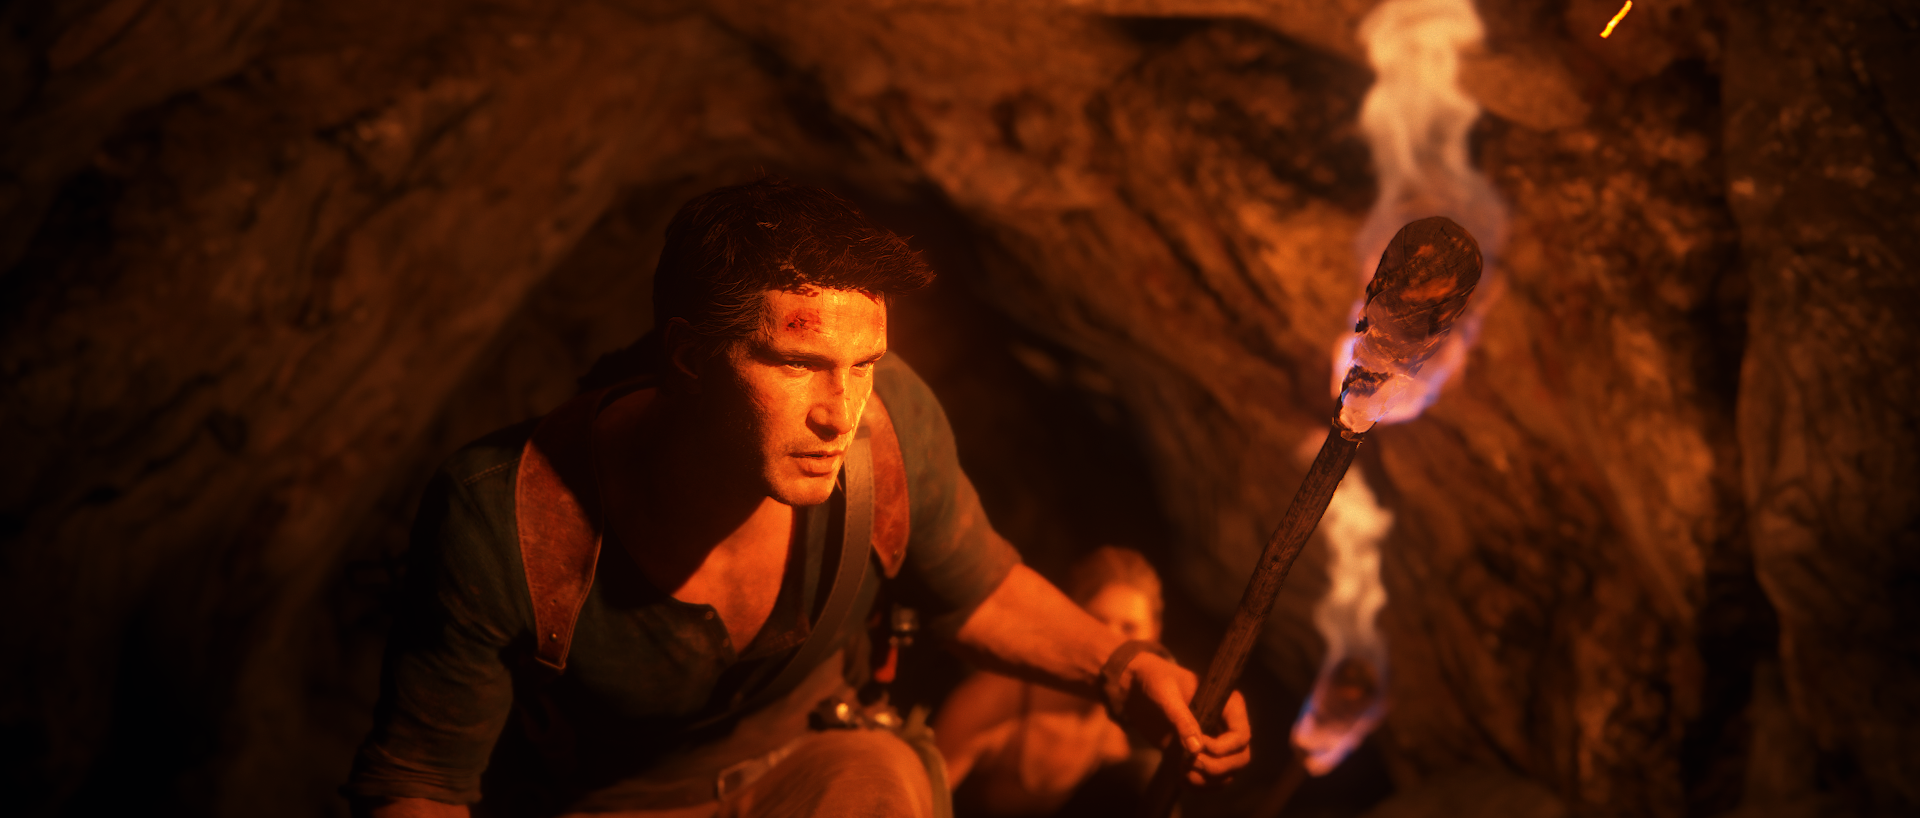 604Uncharted4AThiefsEnd.png